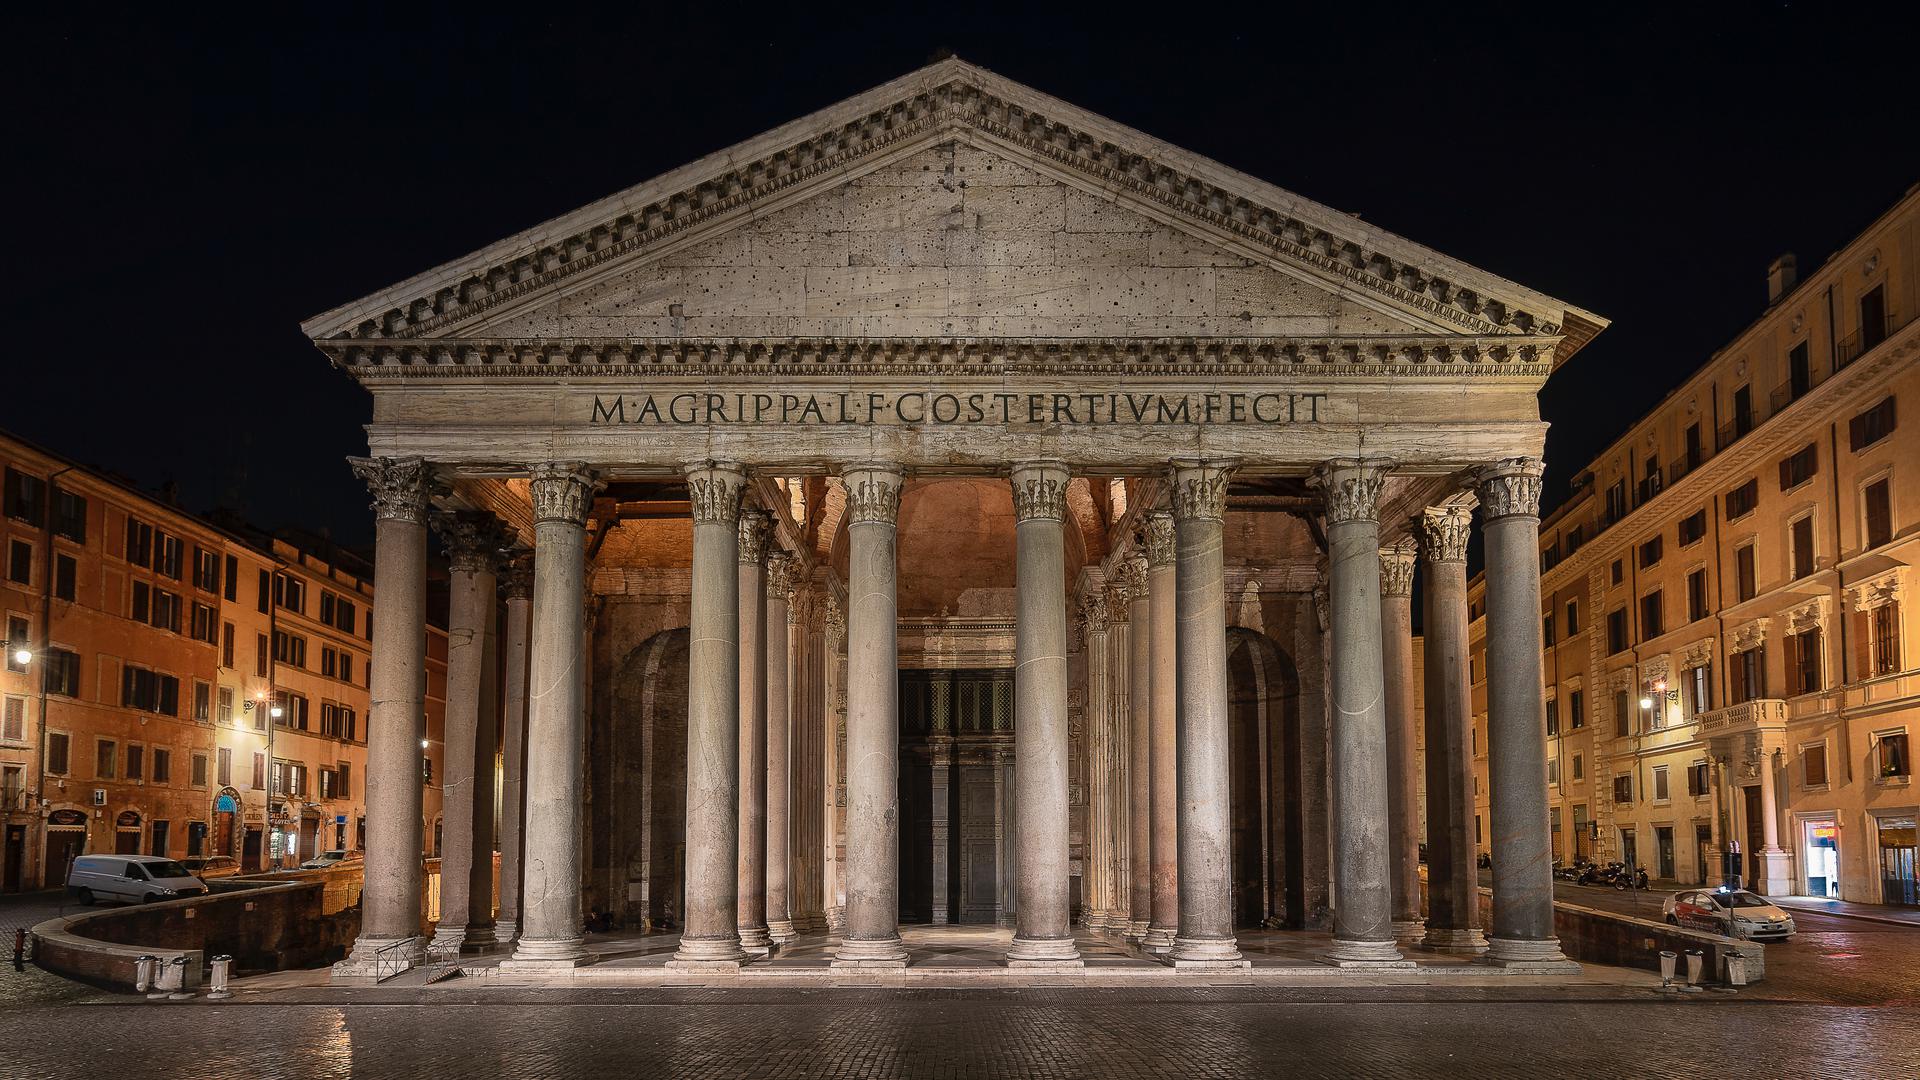 The entrance to the Pantheon in Rome, Italy.